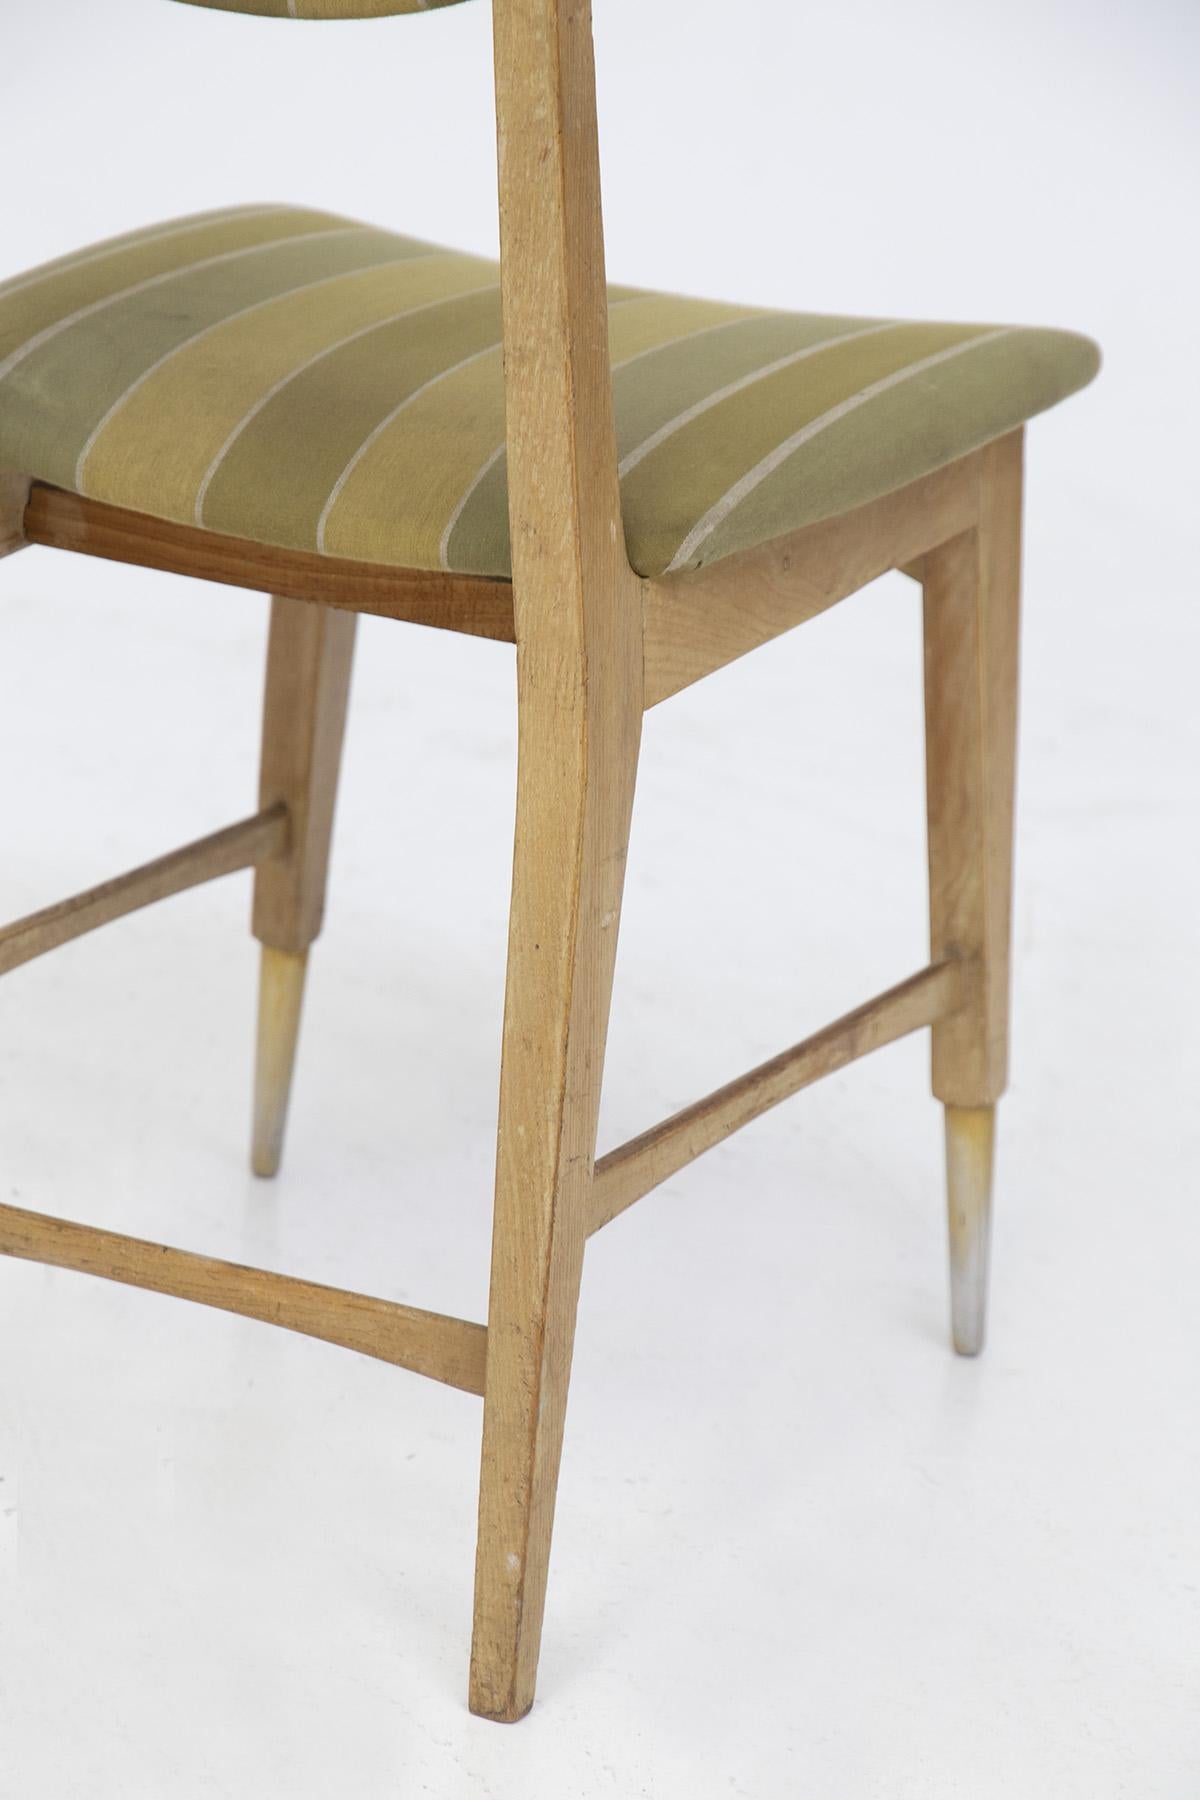 Melchiorre Bega Vintage Wood and Fabric Chairs In Good Condition For Sale In Milano, IT